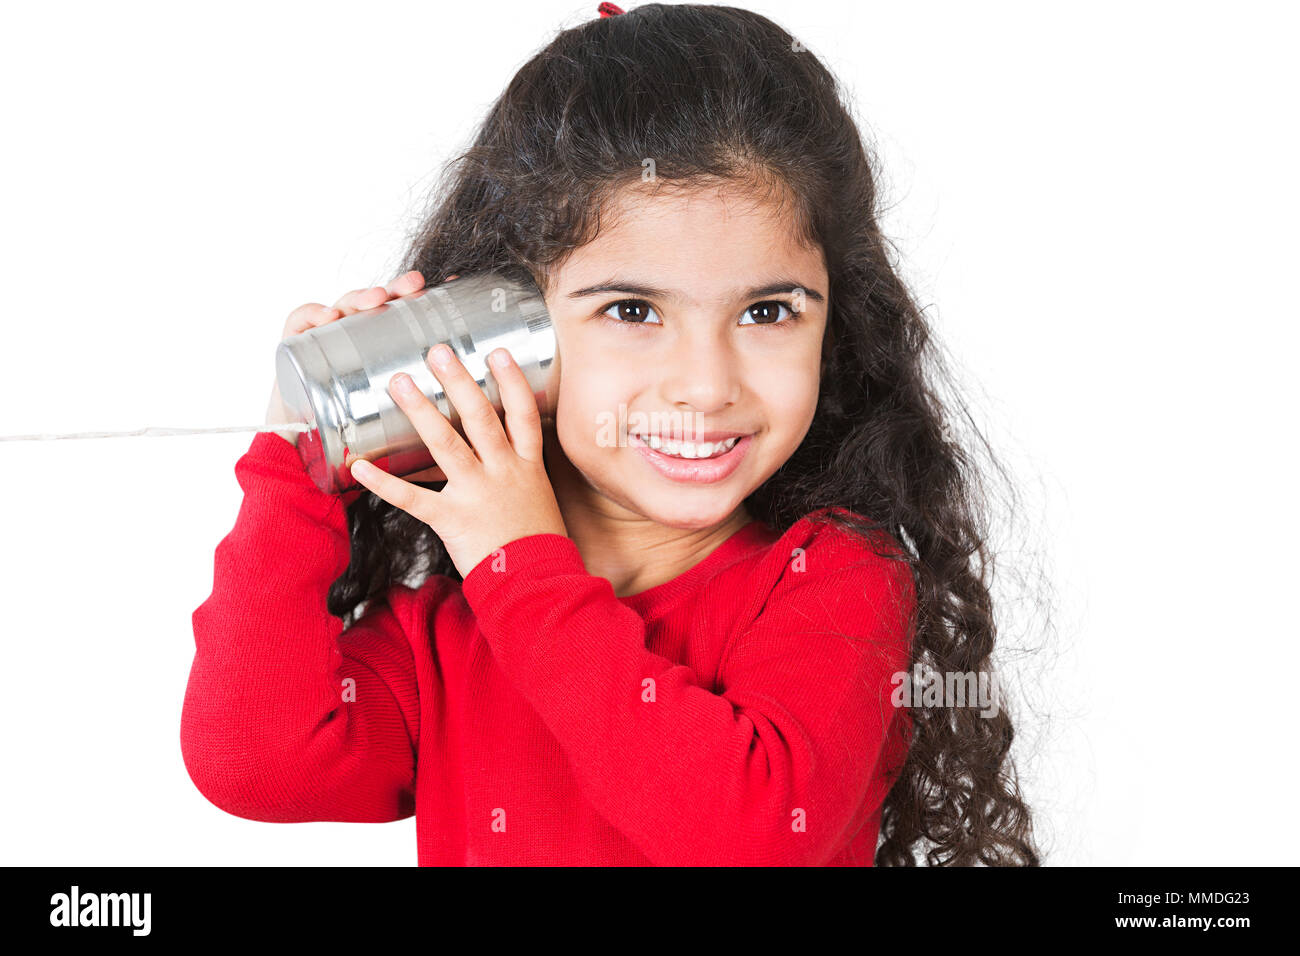 One Little Girl listening tin-can phone connected by string, concept for communication Stock Photo